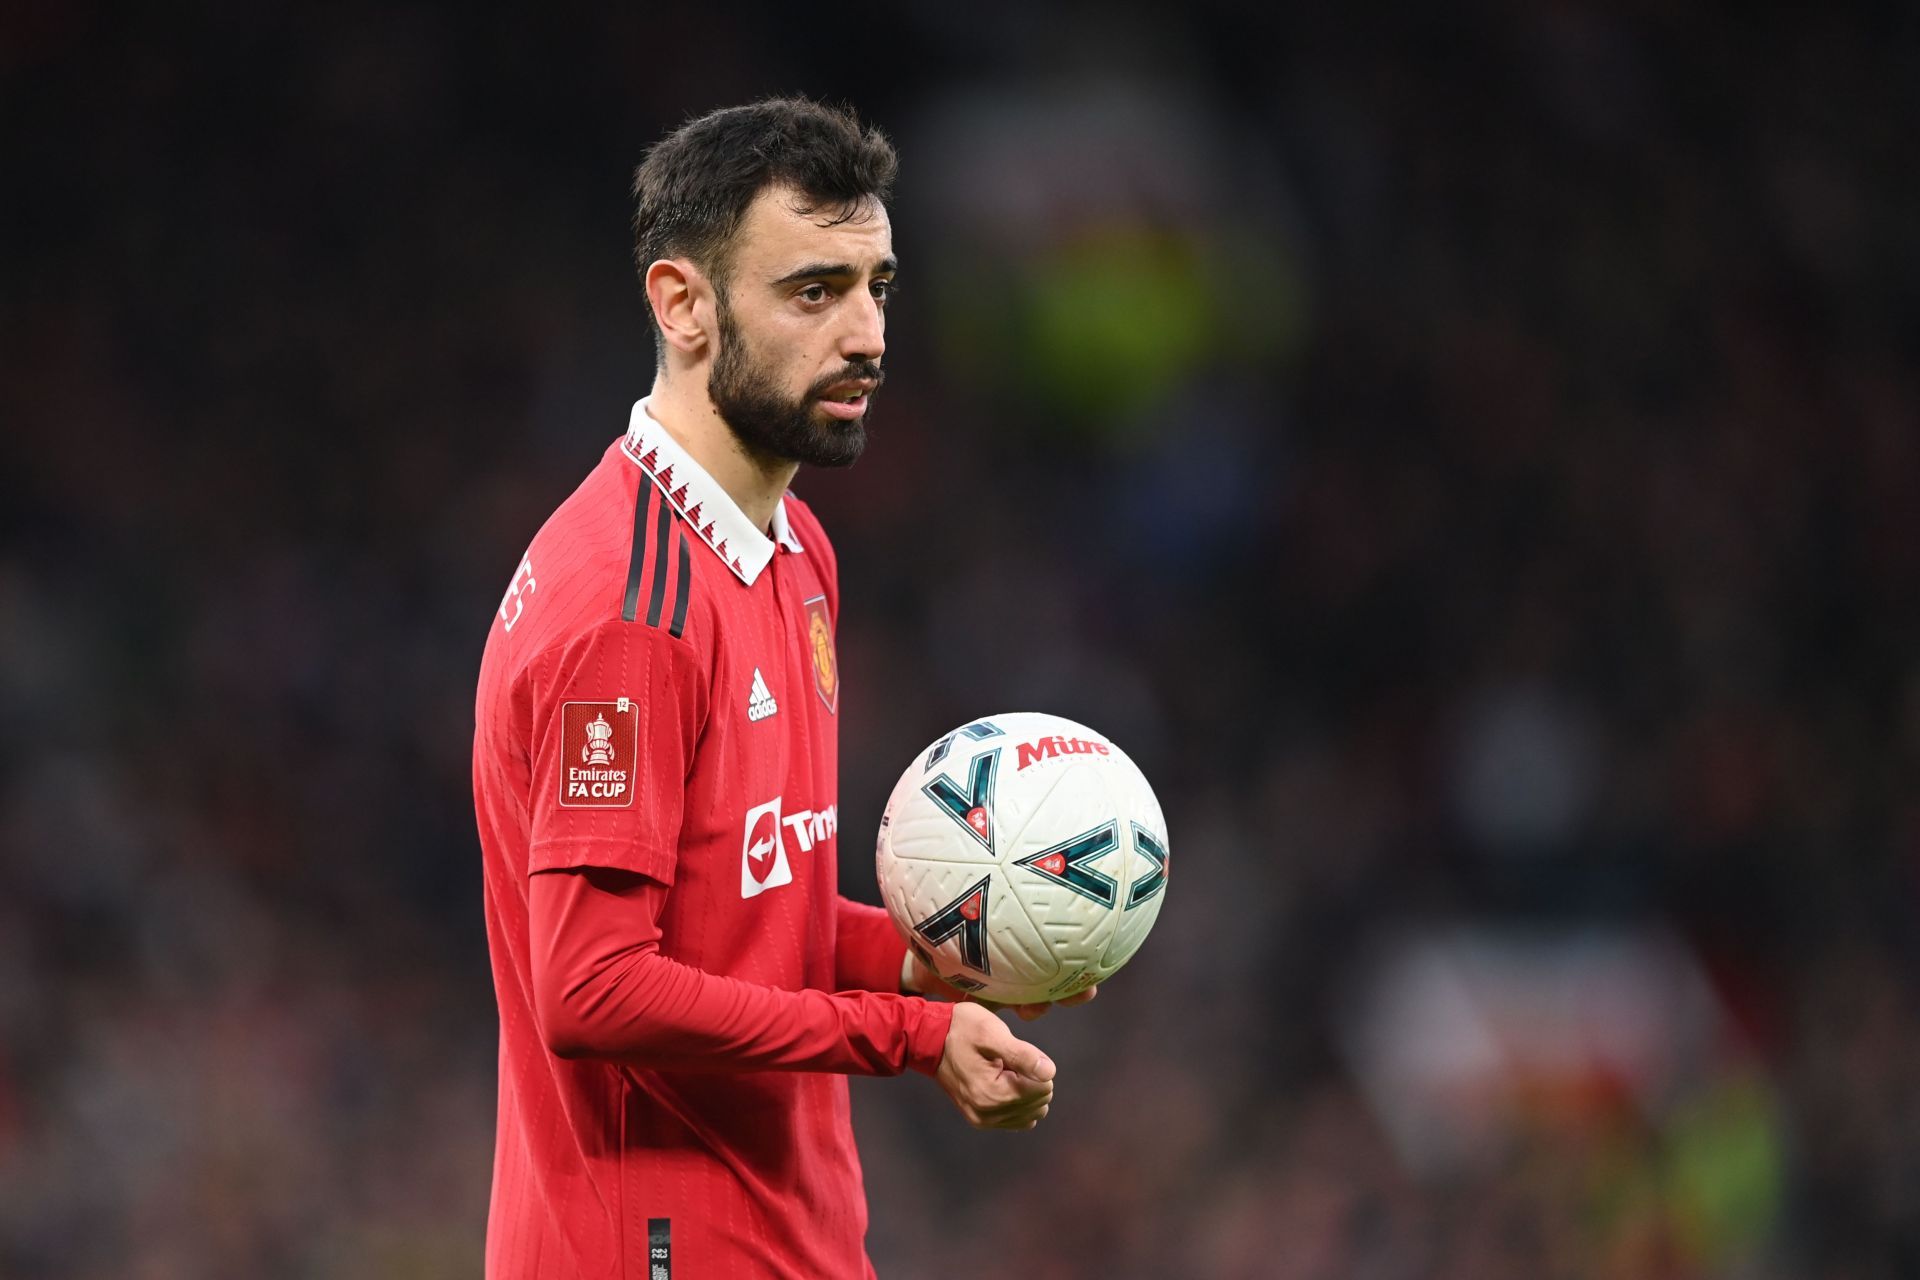 Bruno Fernandes has been outstanding since arriving at Old Trafford.